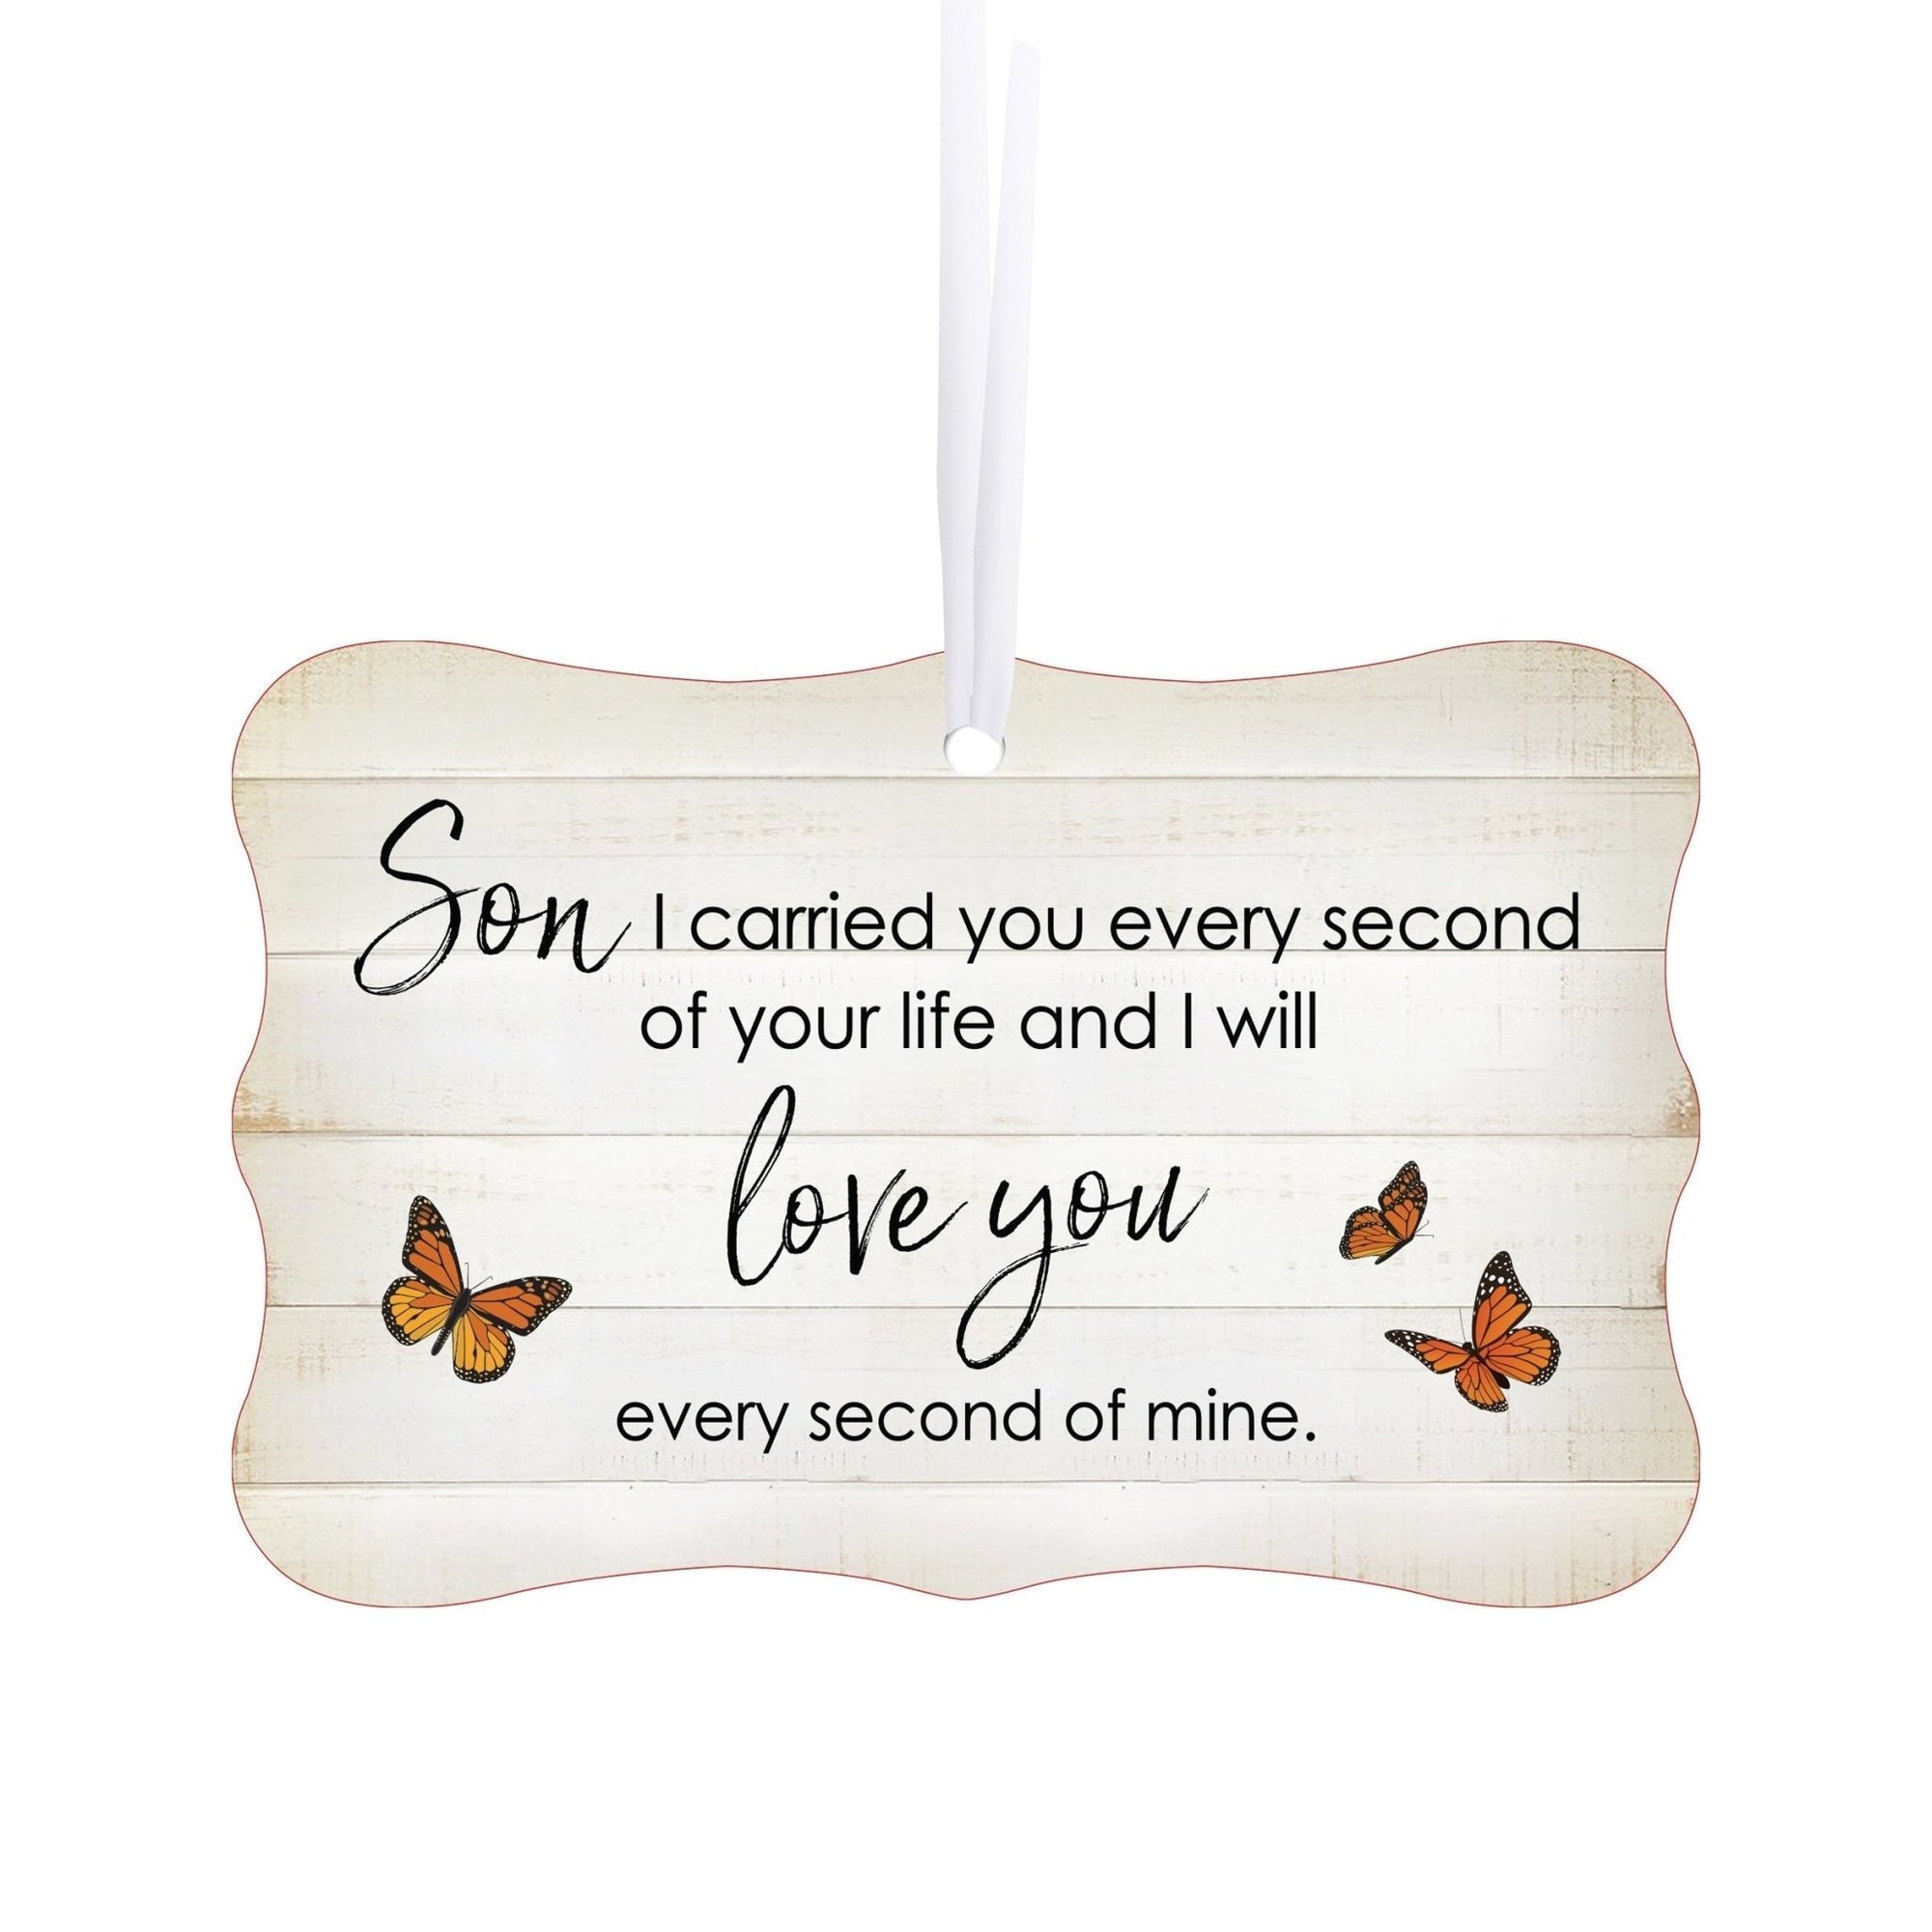 Memorial ornament to keep the memory of your loved one alive – a meaningful gift for bereaved hearts.